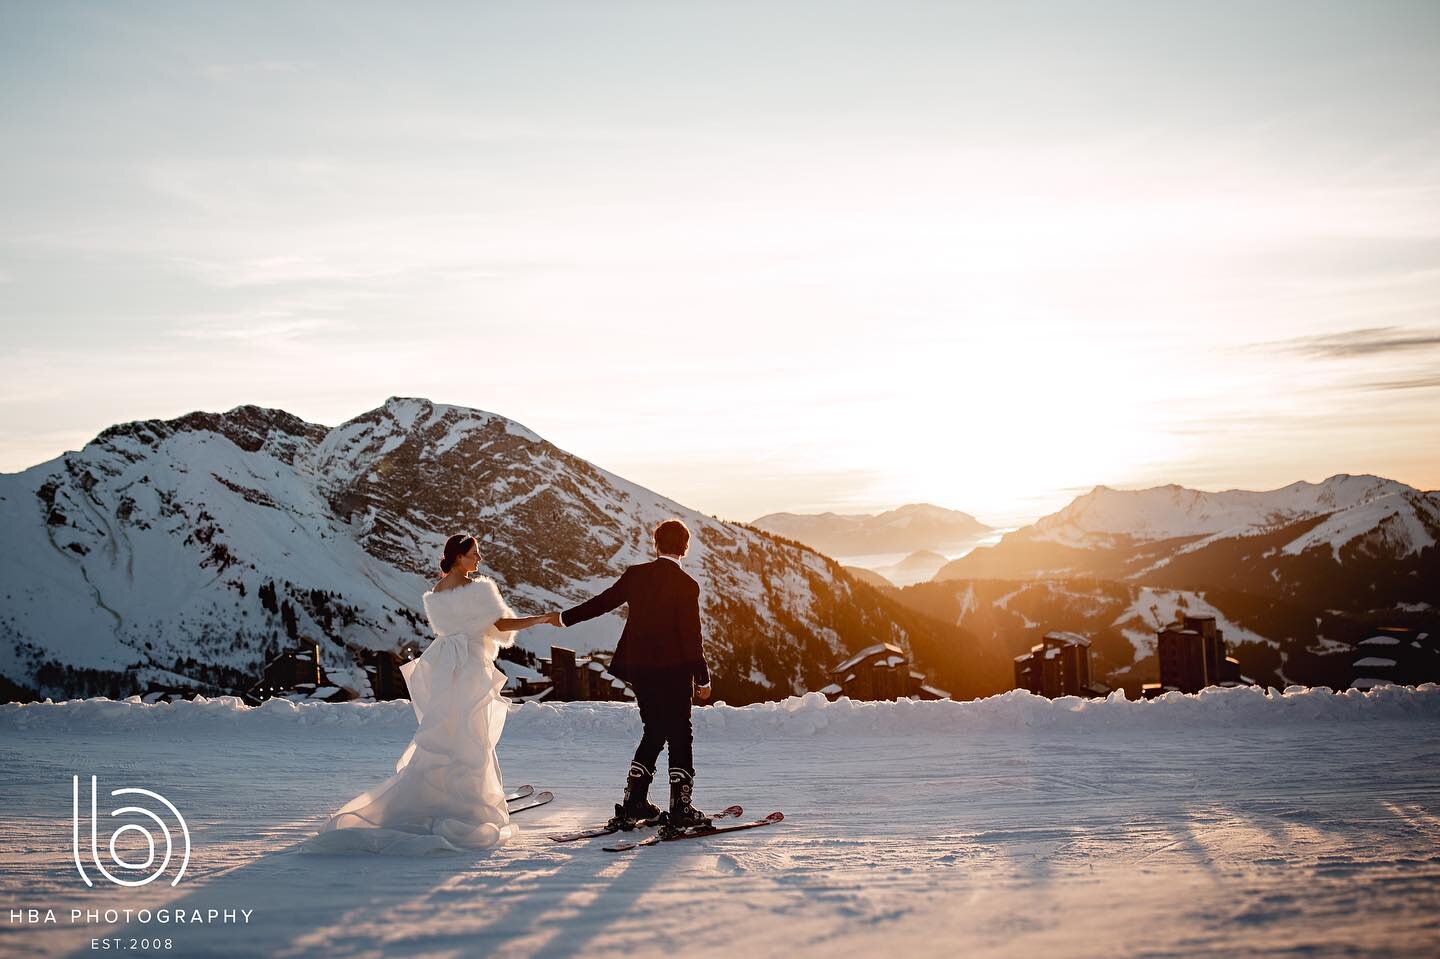 Swipe to see the most INSANE shot by @hba.photography.ben from this epic wedding in January. ✨

Then swipe again to see where the couple ended up! 

What a day and what a wedding. When two ski instructors get married in a ski resort, you know it&rsqu